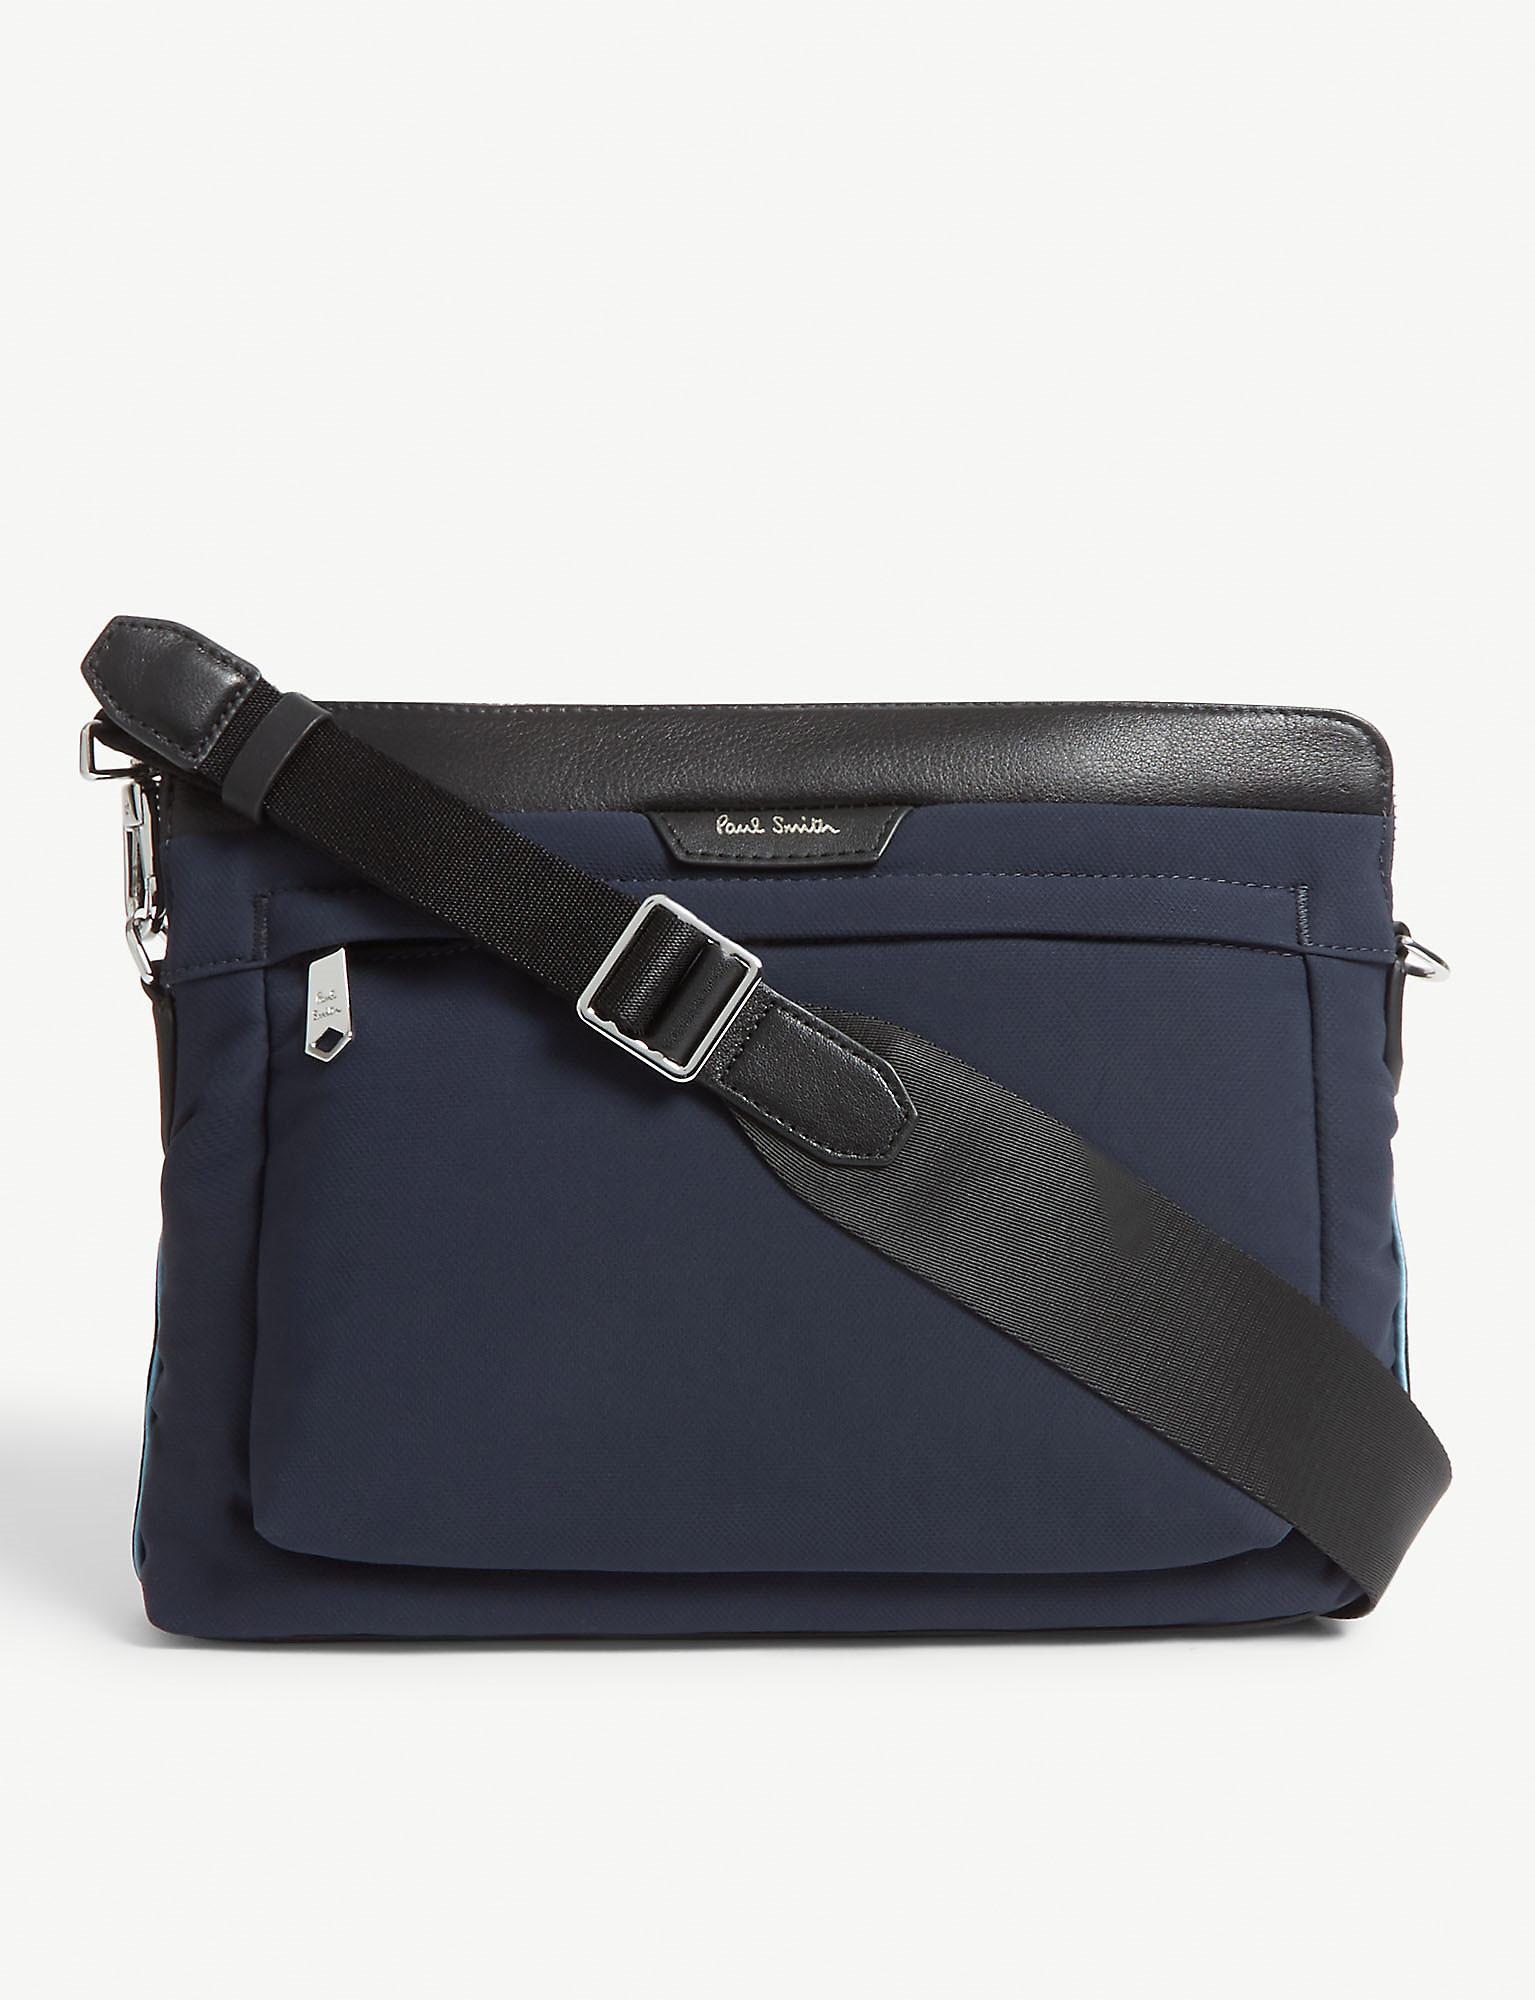 Paul Smith Synthetic Leather-trimmed Nylon Cross-body Bag in Navy (Blue ...